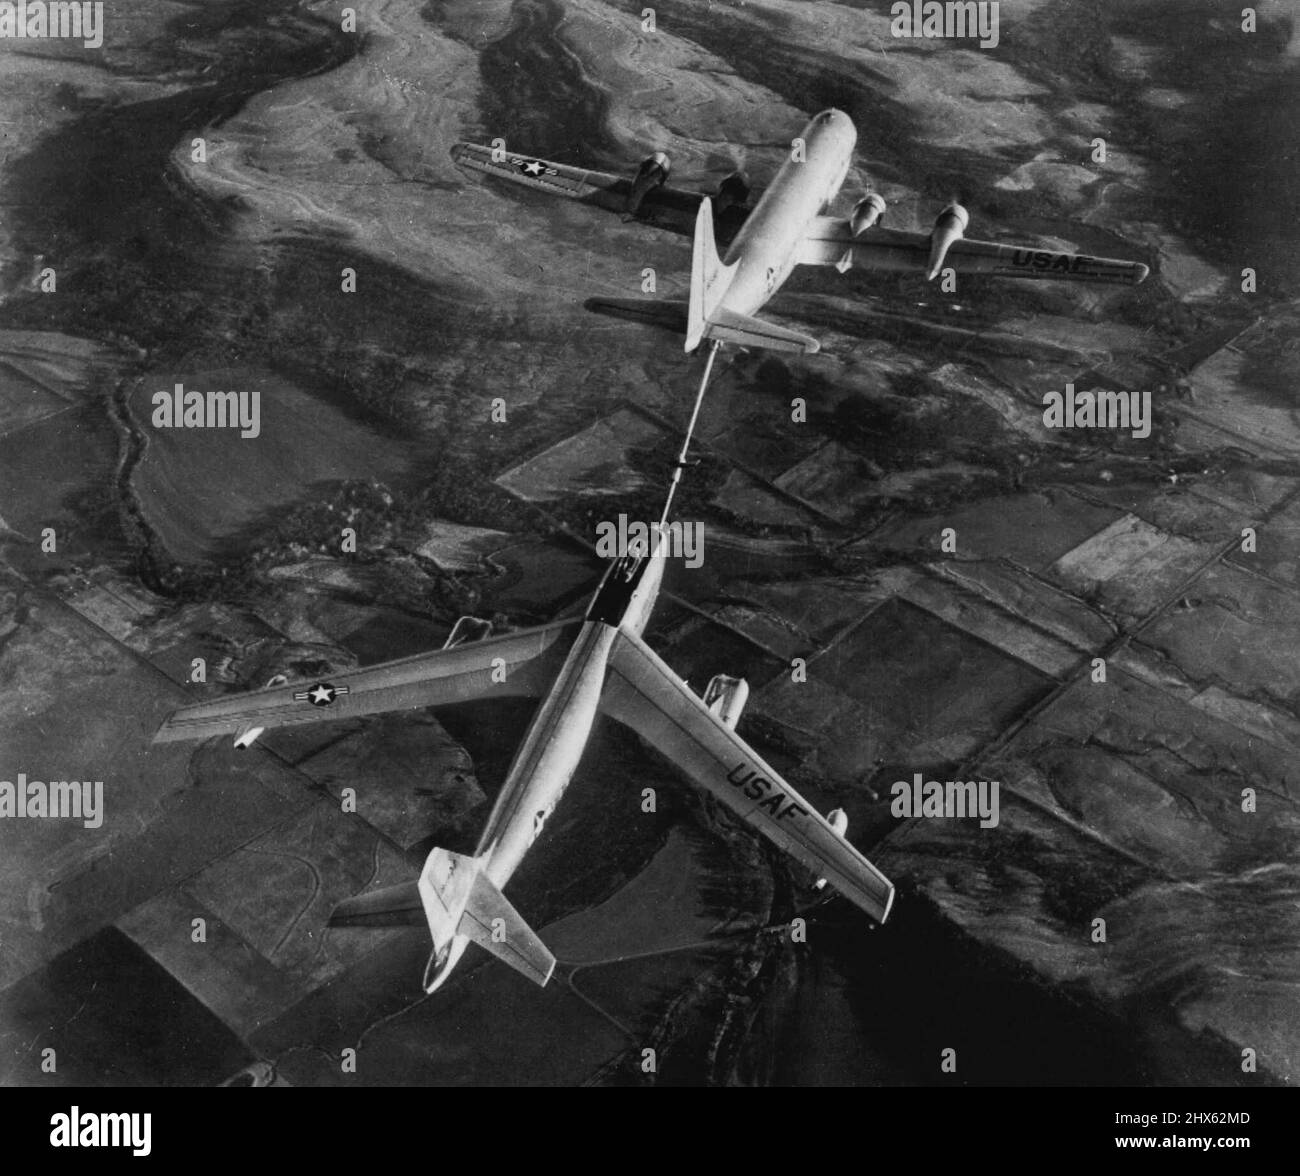 Fastest Jet Bomber Tanked Up In Air -- Here's the first released picture of the world's fastest bombers, a six-jet, 600-mile an-hour Boeing B-47 stratojet bomber, (bottom) being refueled from a double-deck Boeing KC-97A tanker plane. In this method of refueling, now a standard U.S. Air Force practice, fuel boom form under tail of tanker plane is connected with coupling in nose of bomber and the fuel is pumped in at high speed. June 18, 1951. (Photo by AP Wirephoto). Stock Photo